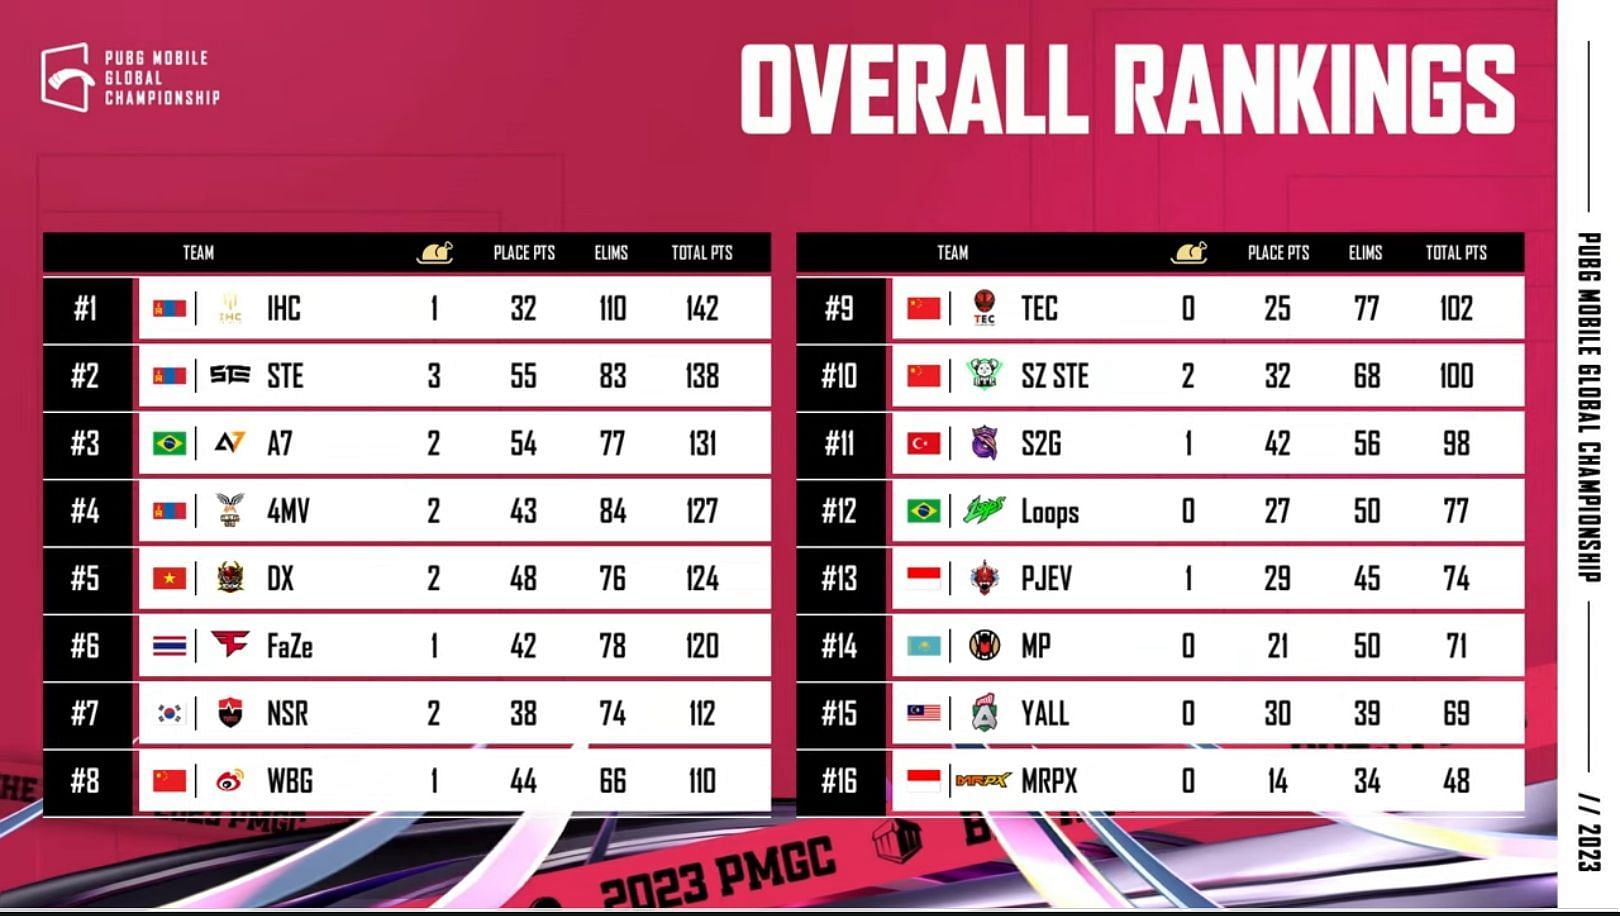 Overall points table of Global Championship 2023 Finals (Image via PUBG Mobile)